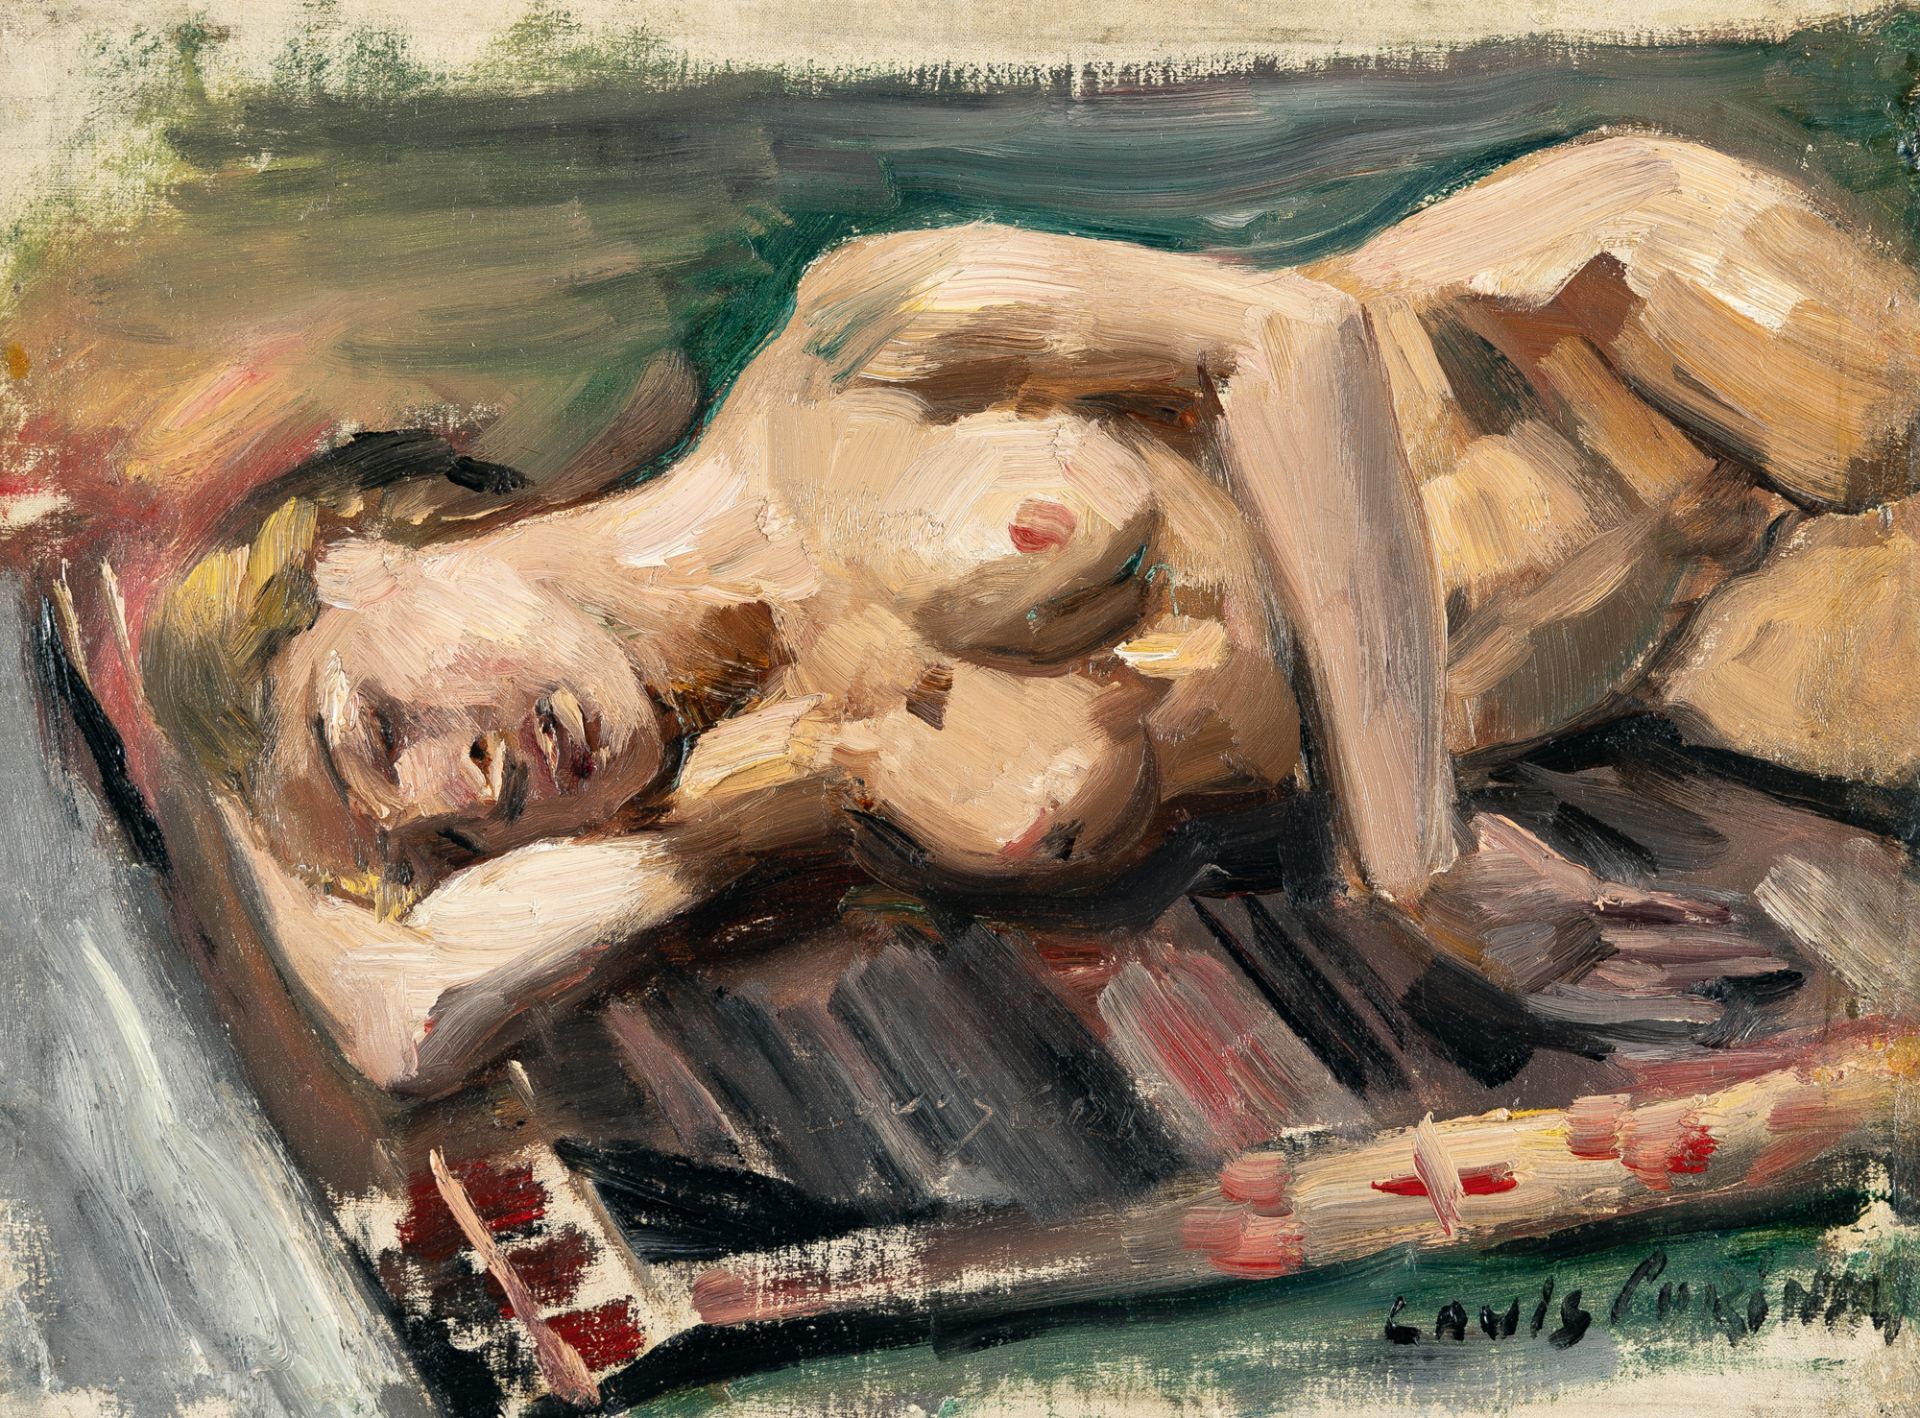 Lovis Corinth, Female demi-nude.Oil on canvas, relined. (1913). Ca. 35.5 x 47.5 cm. Signed lower